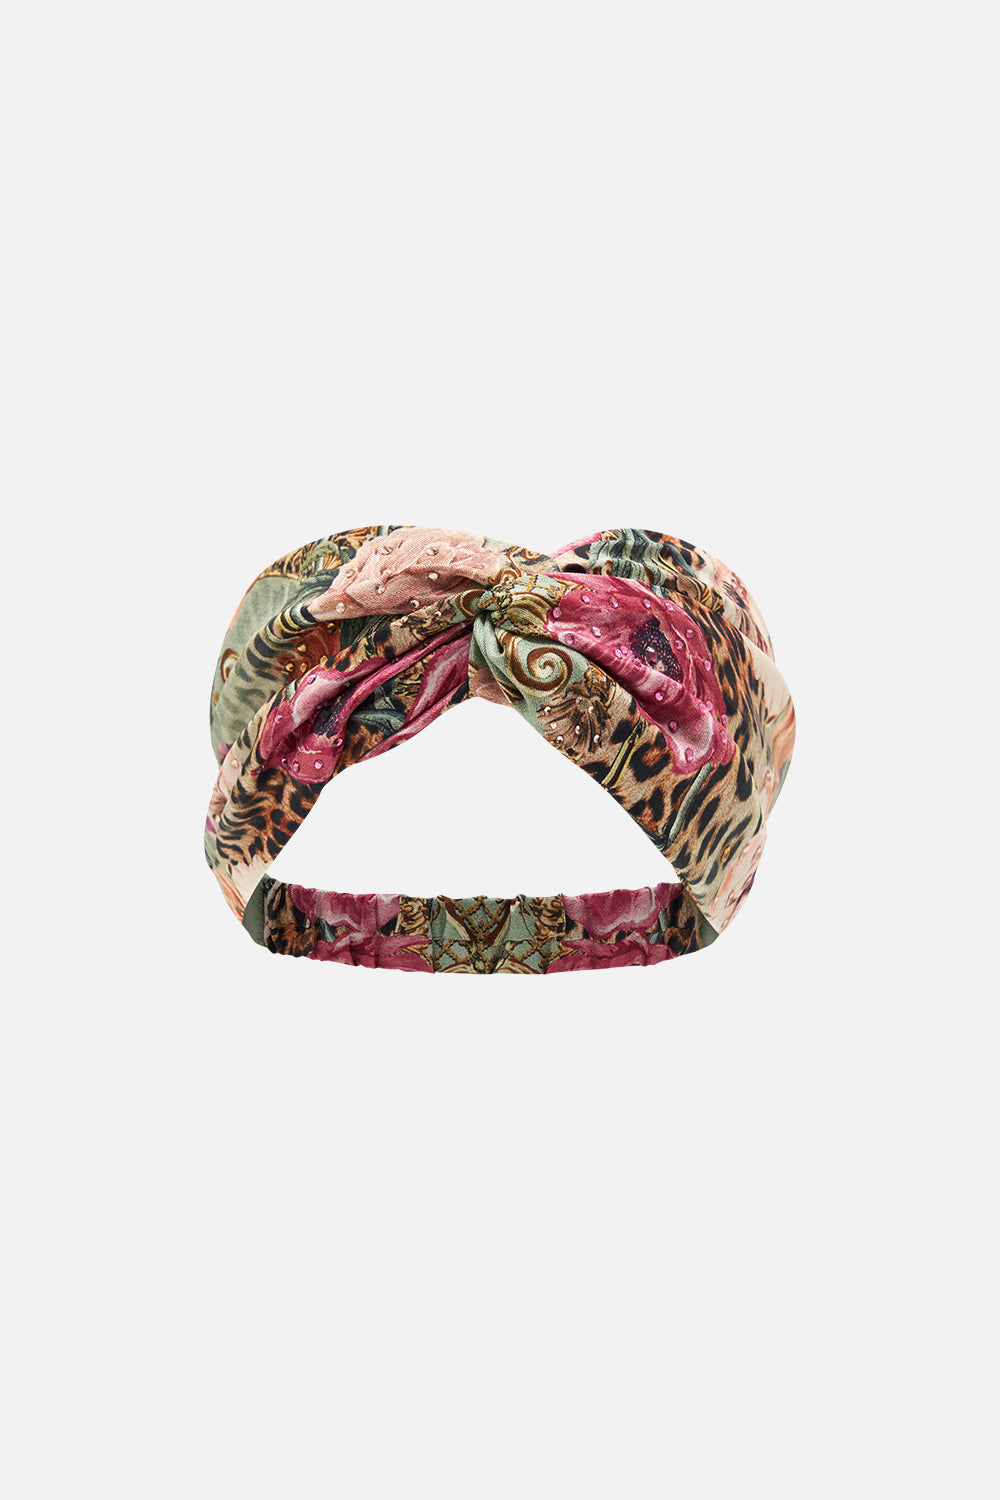 Product view of CAMILLA silk twist front headband in floral Grow and Glow print 